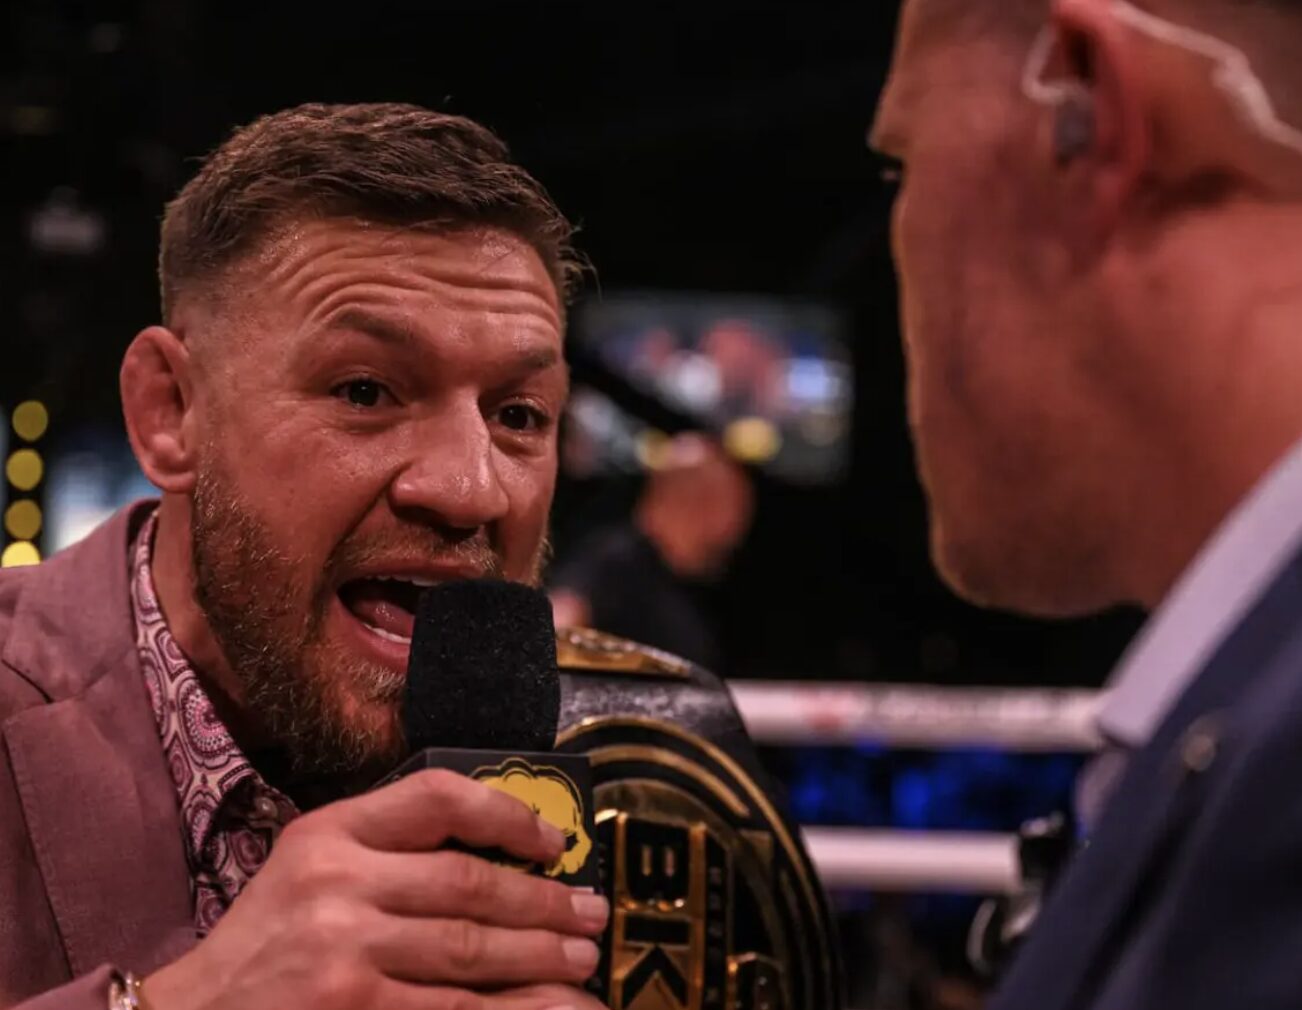 McGregor On Course To Overtake Dana White After Announcing BKFC Ownership